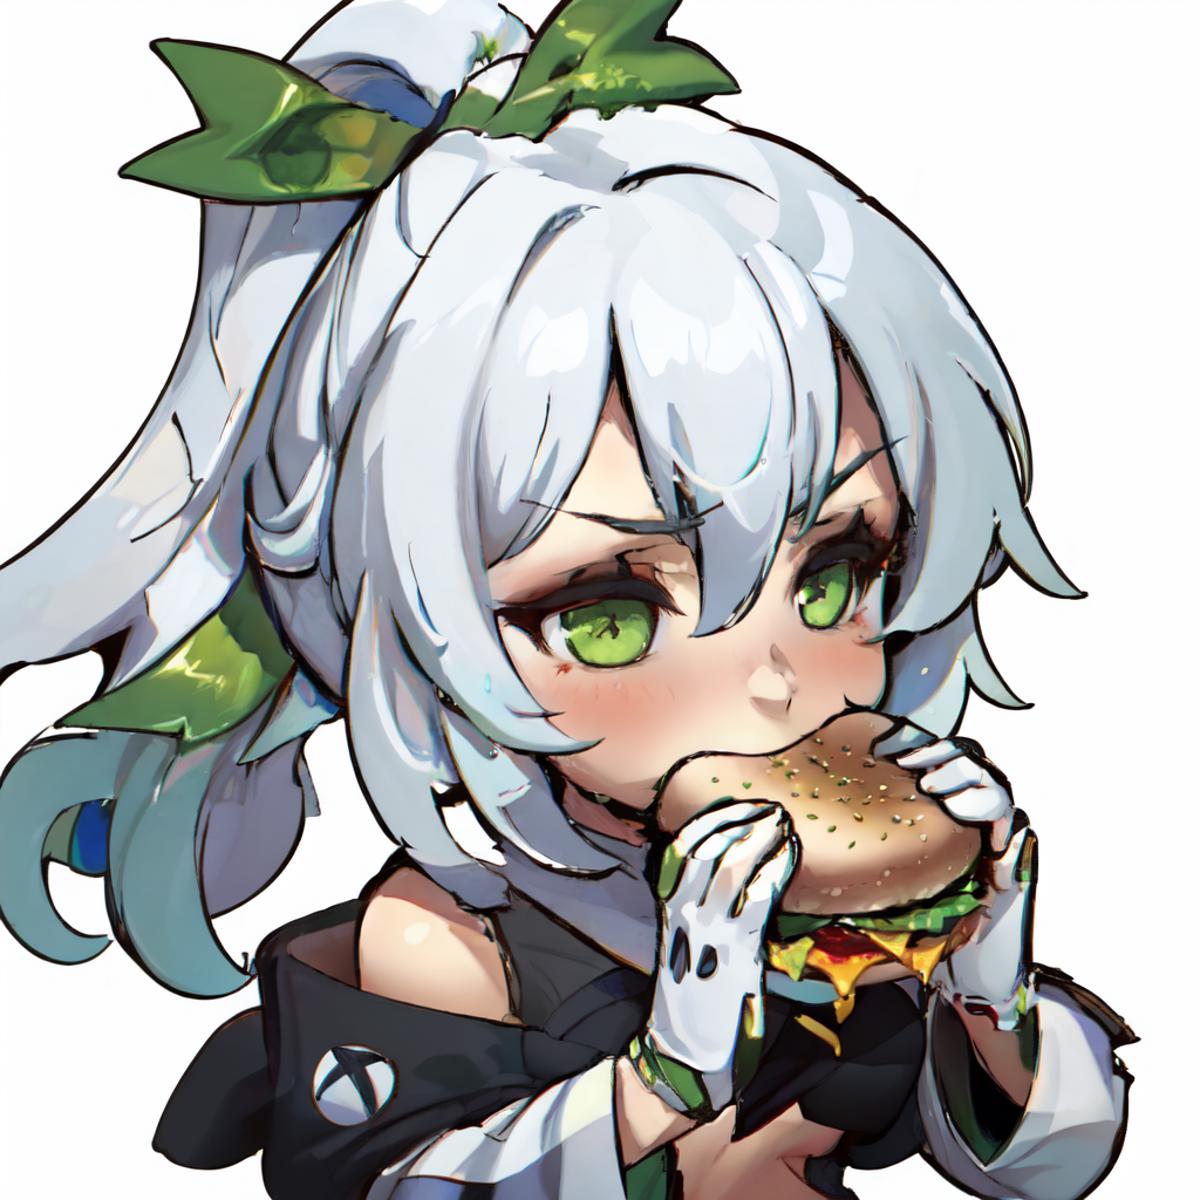 Huge Two-Handed Burger LoRA image by FallenIncursio